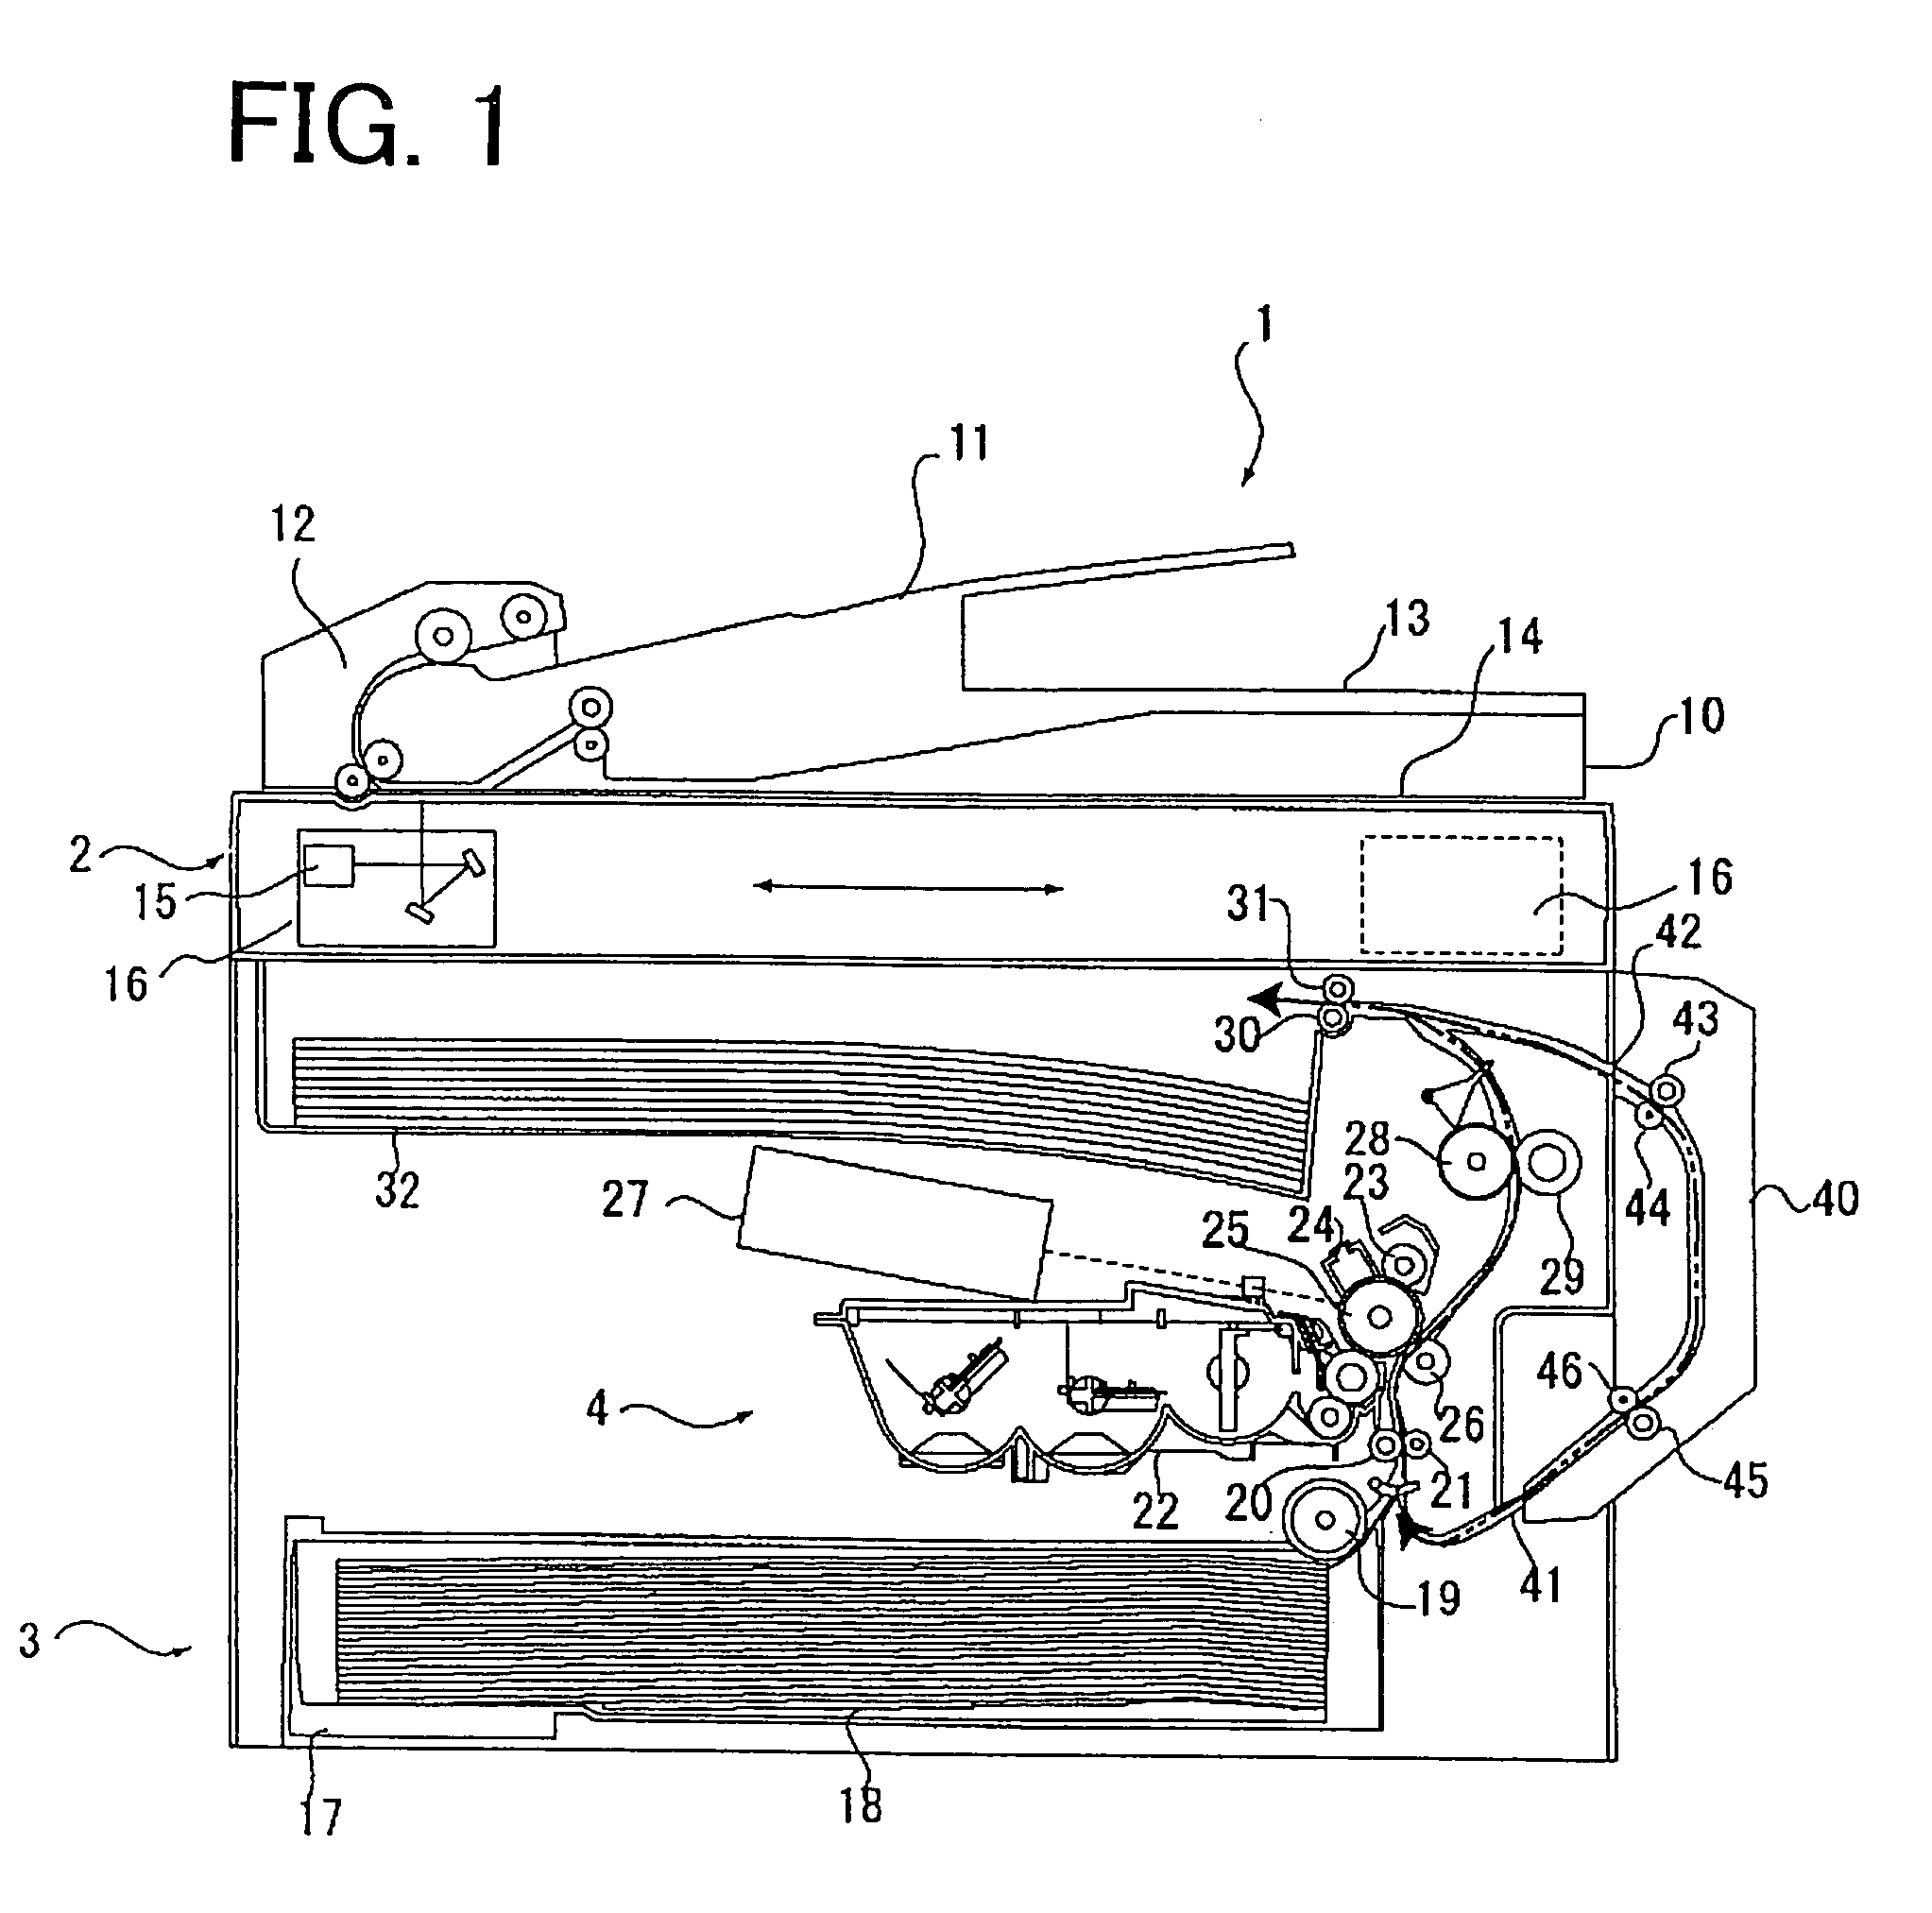 Image forming device and insertable developing unit with identification protrusions for determining compatibility